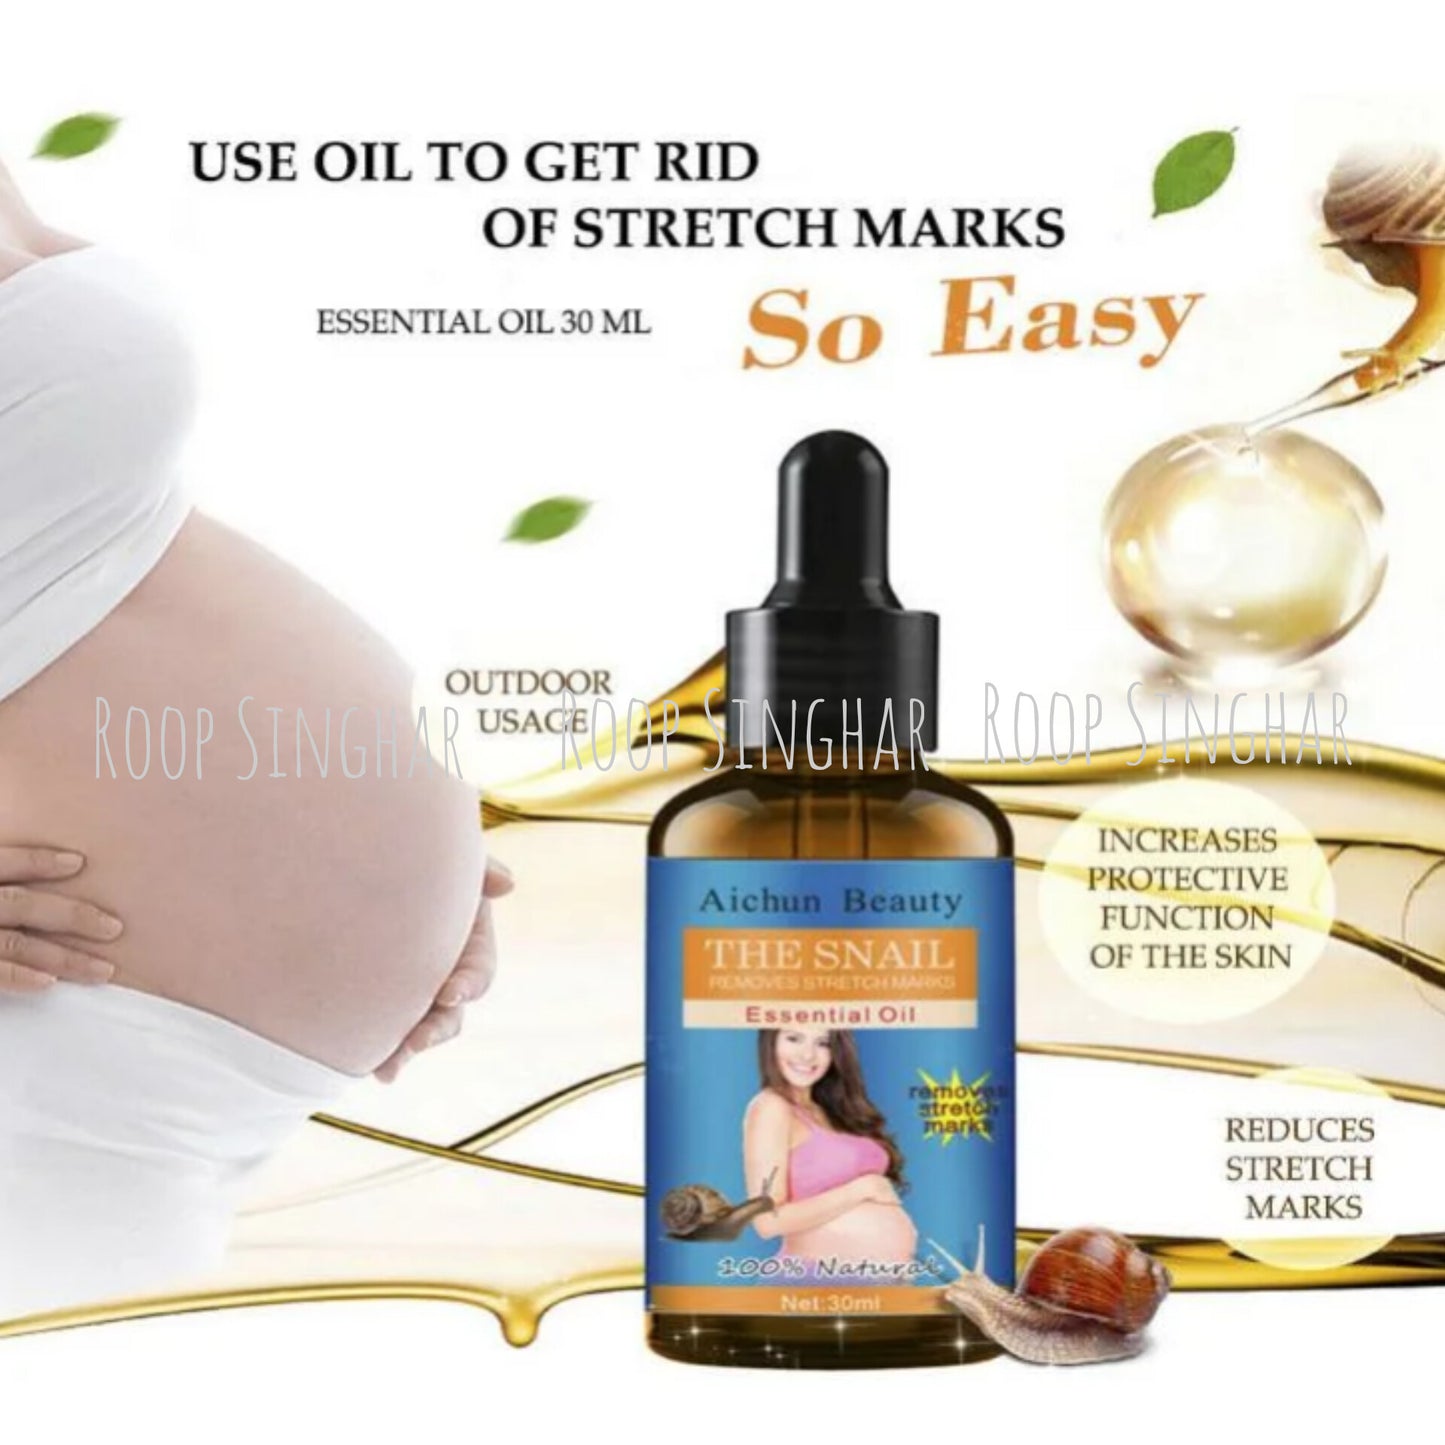 Aichun Beauty THE SNAIL 🐌 Removes stretch marks Essential Oil (30ml)